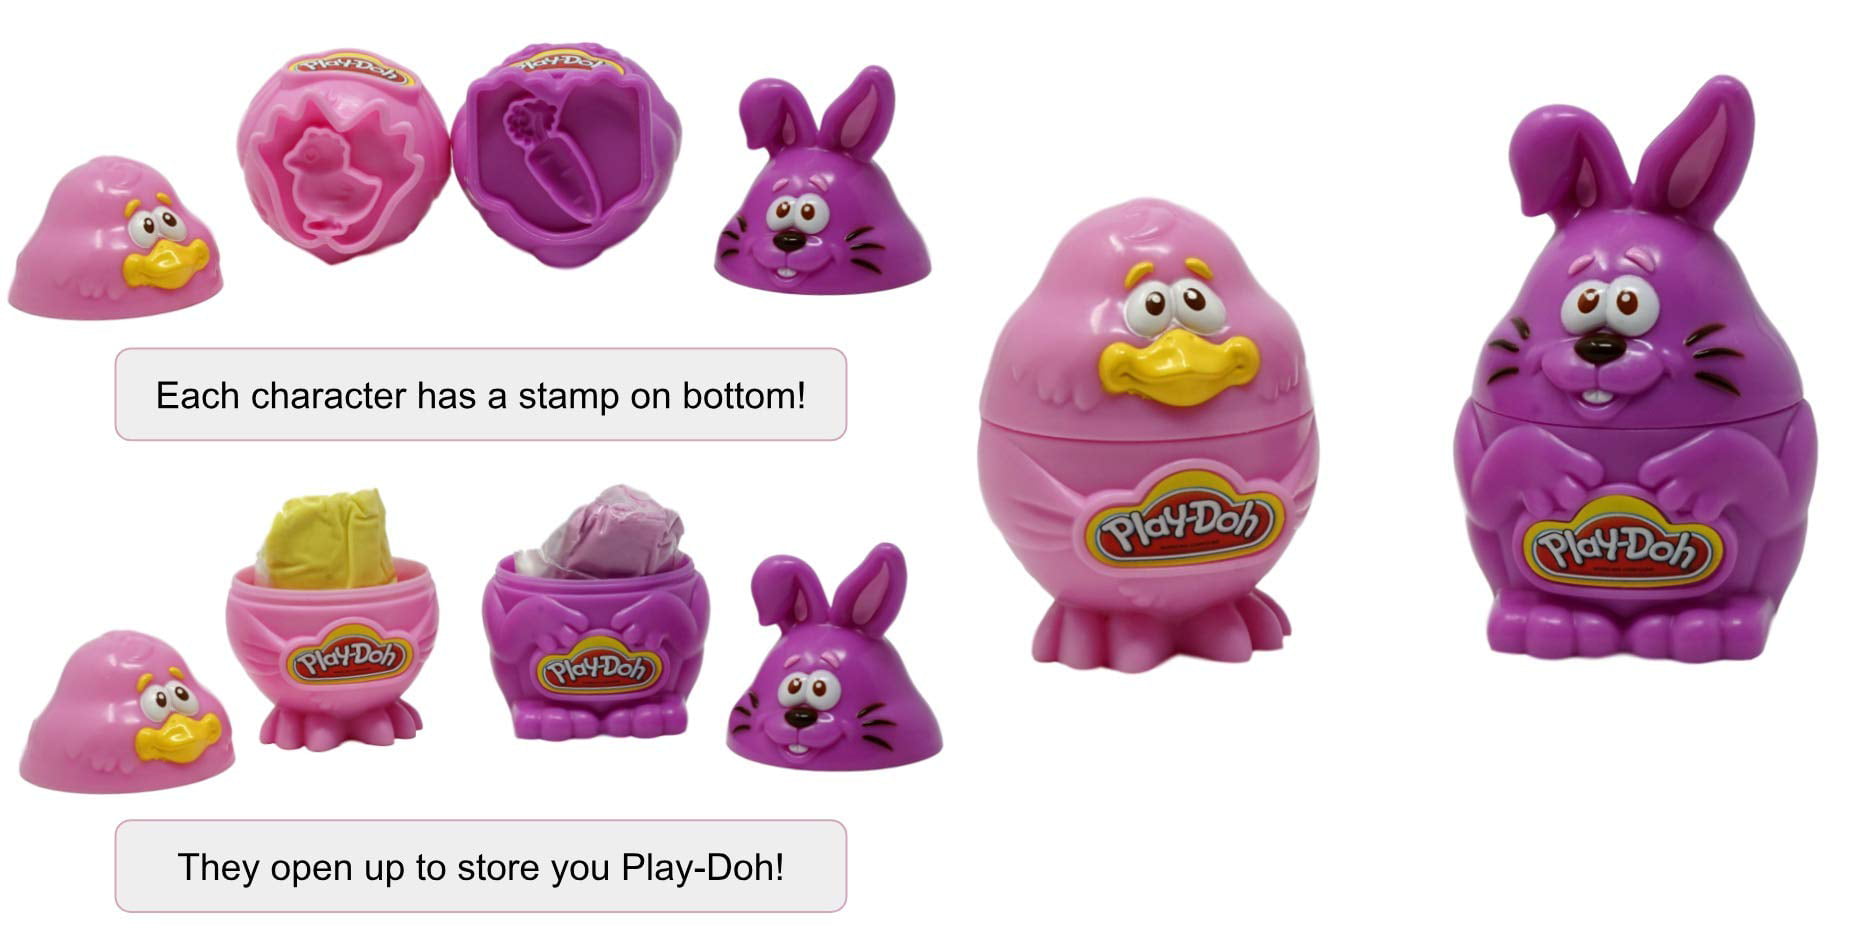 Details about   Play-Doh Easter Set 4 Spring Eggs Bunny & Chick Stampers Filled With Play-Doh 